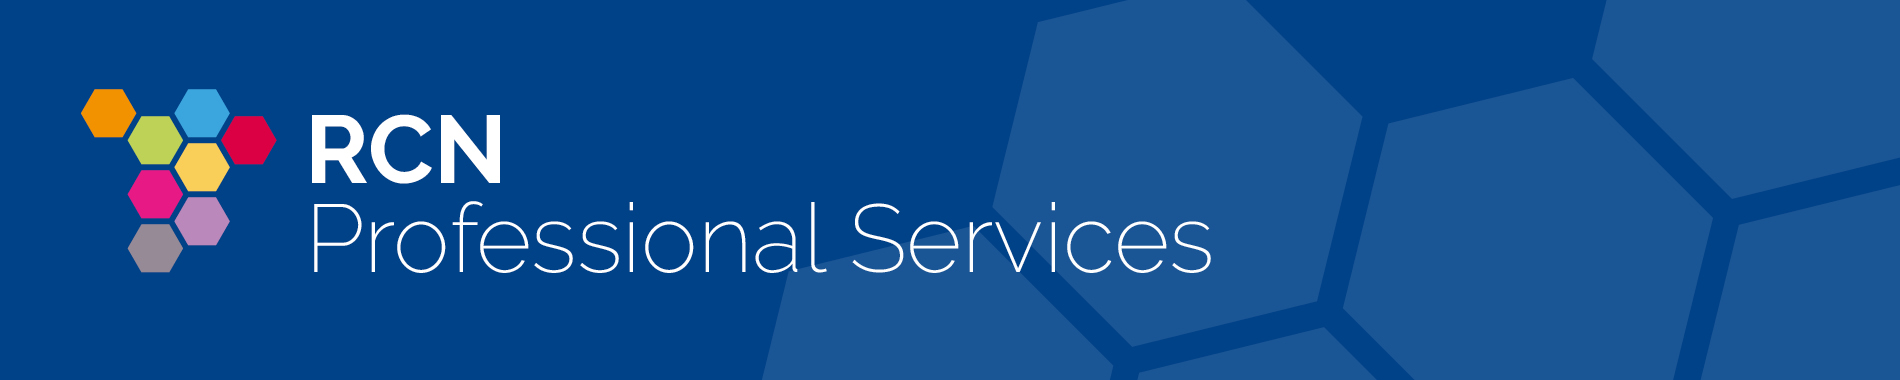 RCN Professional Services 